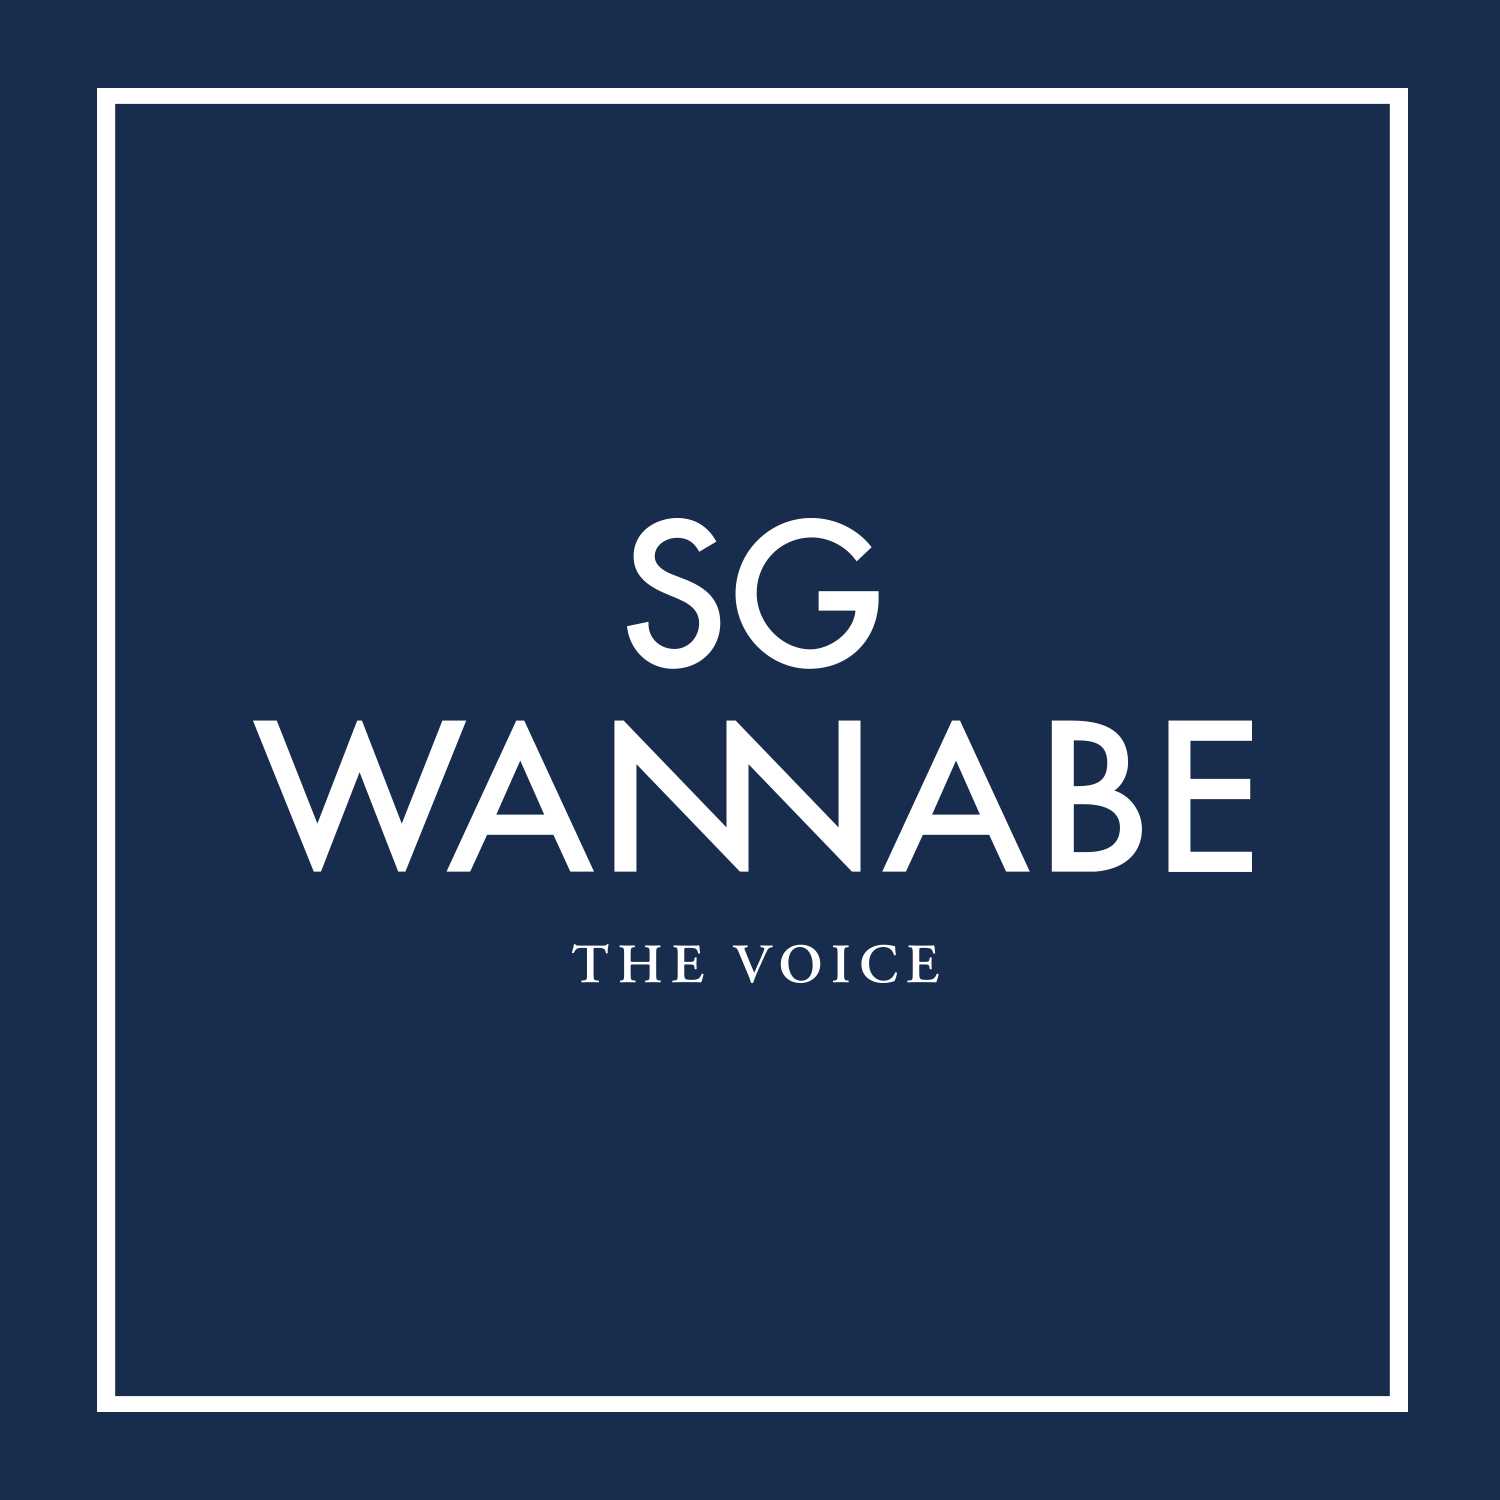 The Voice(SG Wannabe演唱專輯)